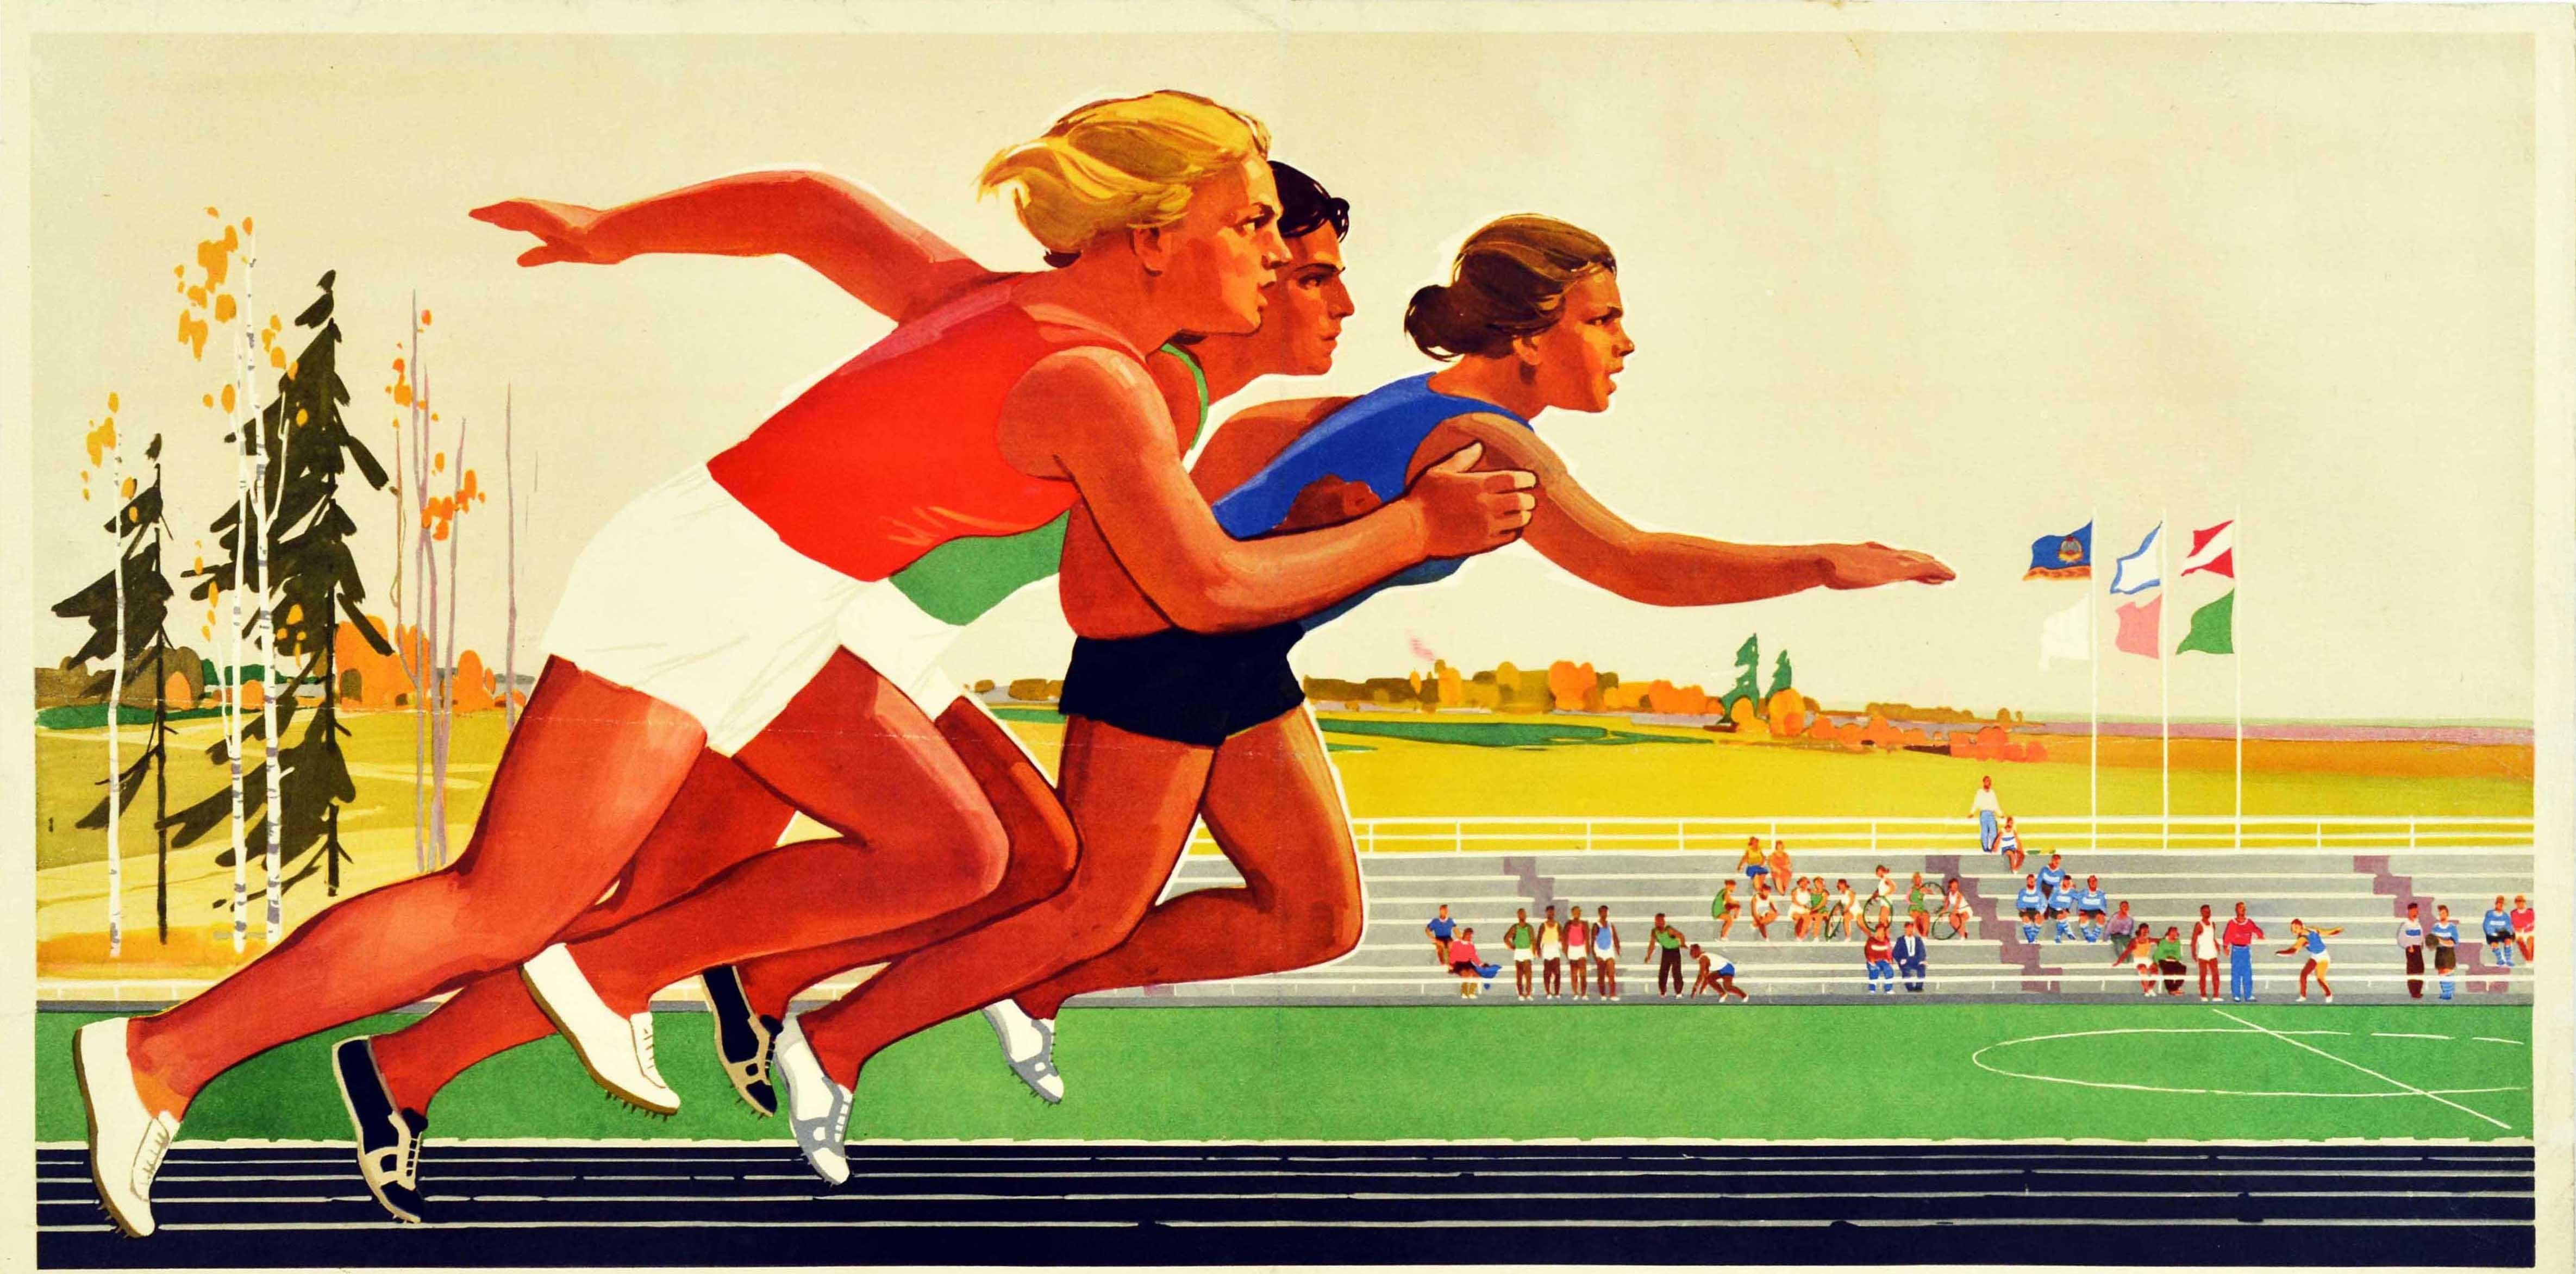 Original vintage Soviet sport poster - Sports to the Masses! ????? ? ?????! - featuring three athletes running forward in a sprint race with other participants by the stadium seating and on the track in the background, flags flying overhead and